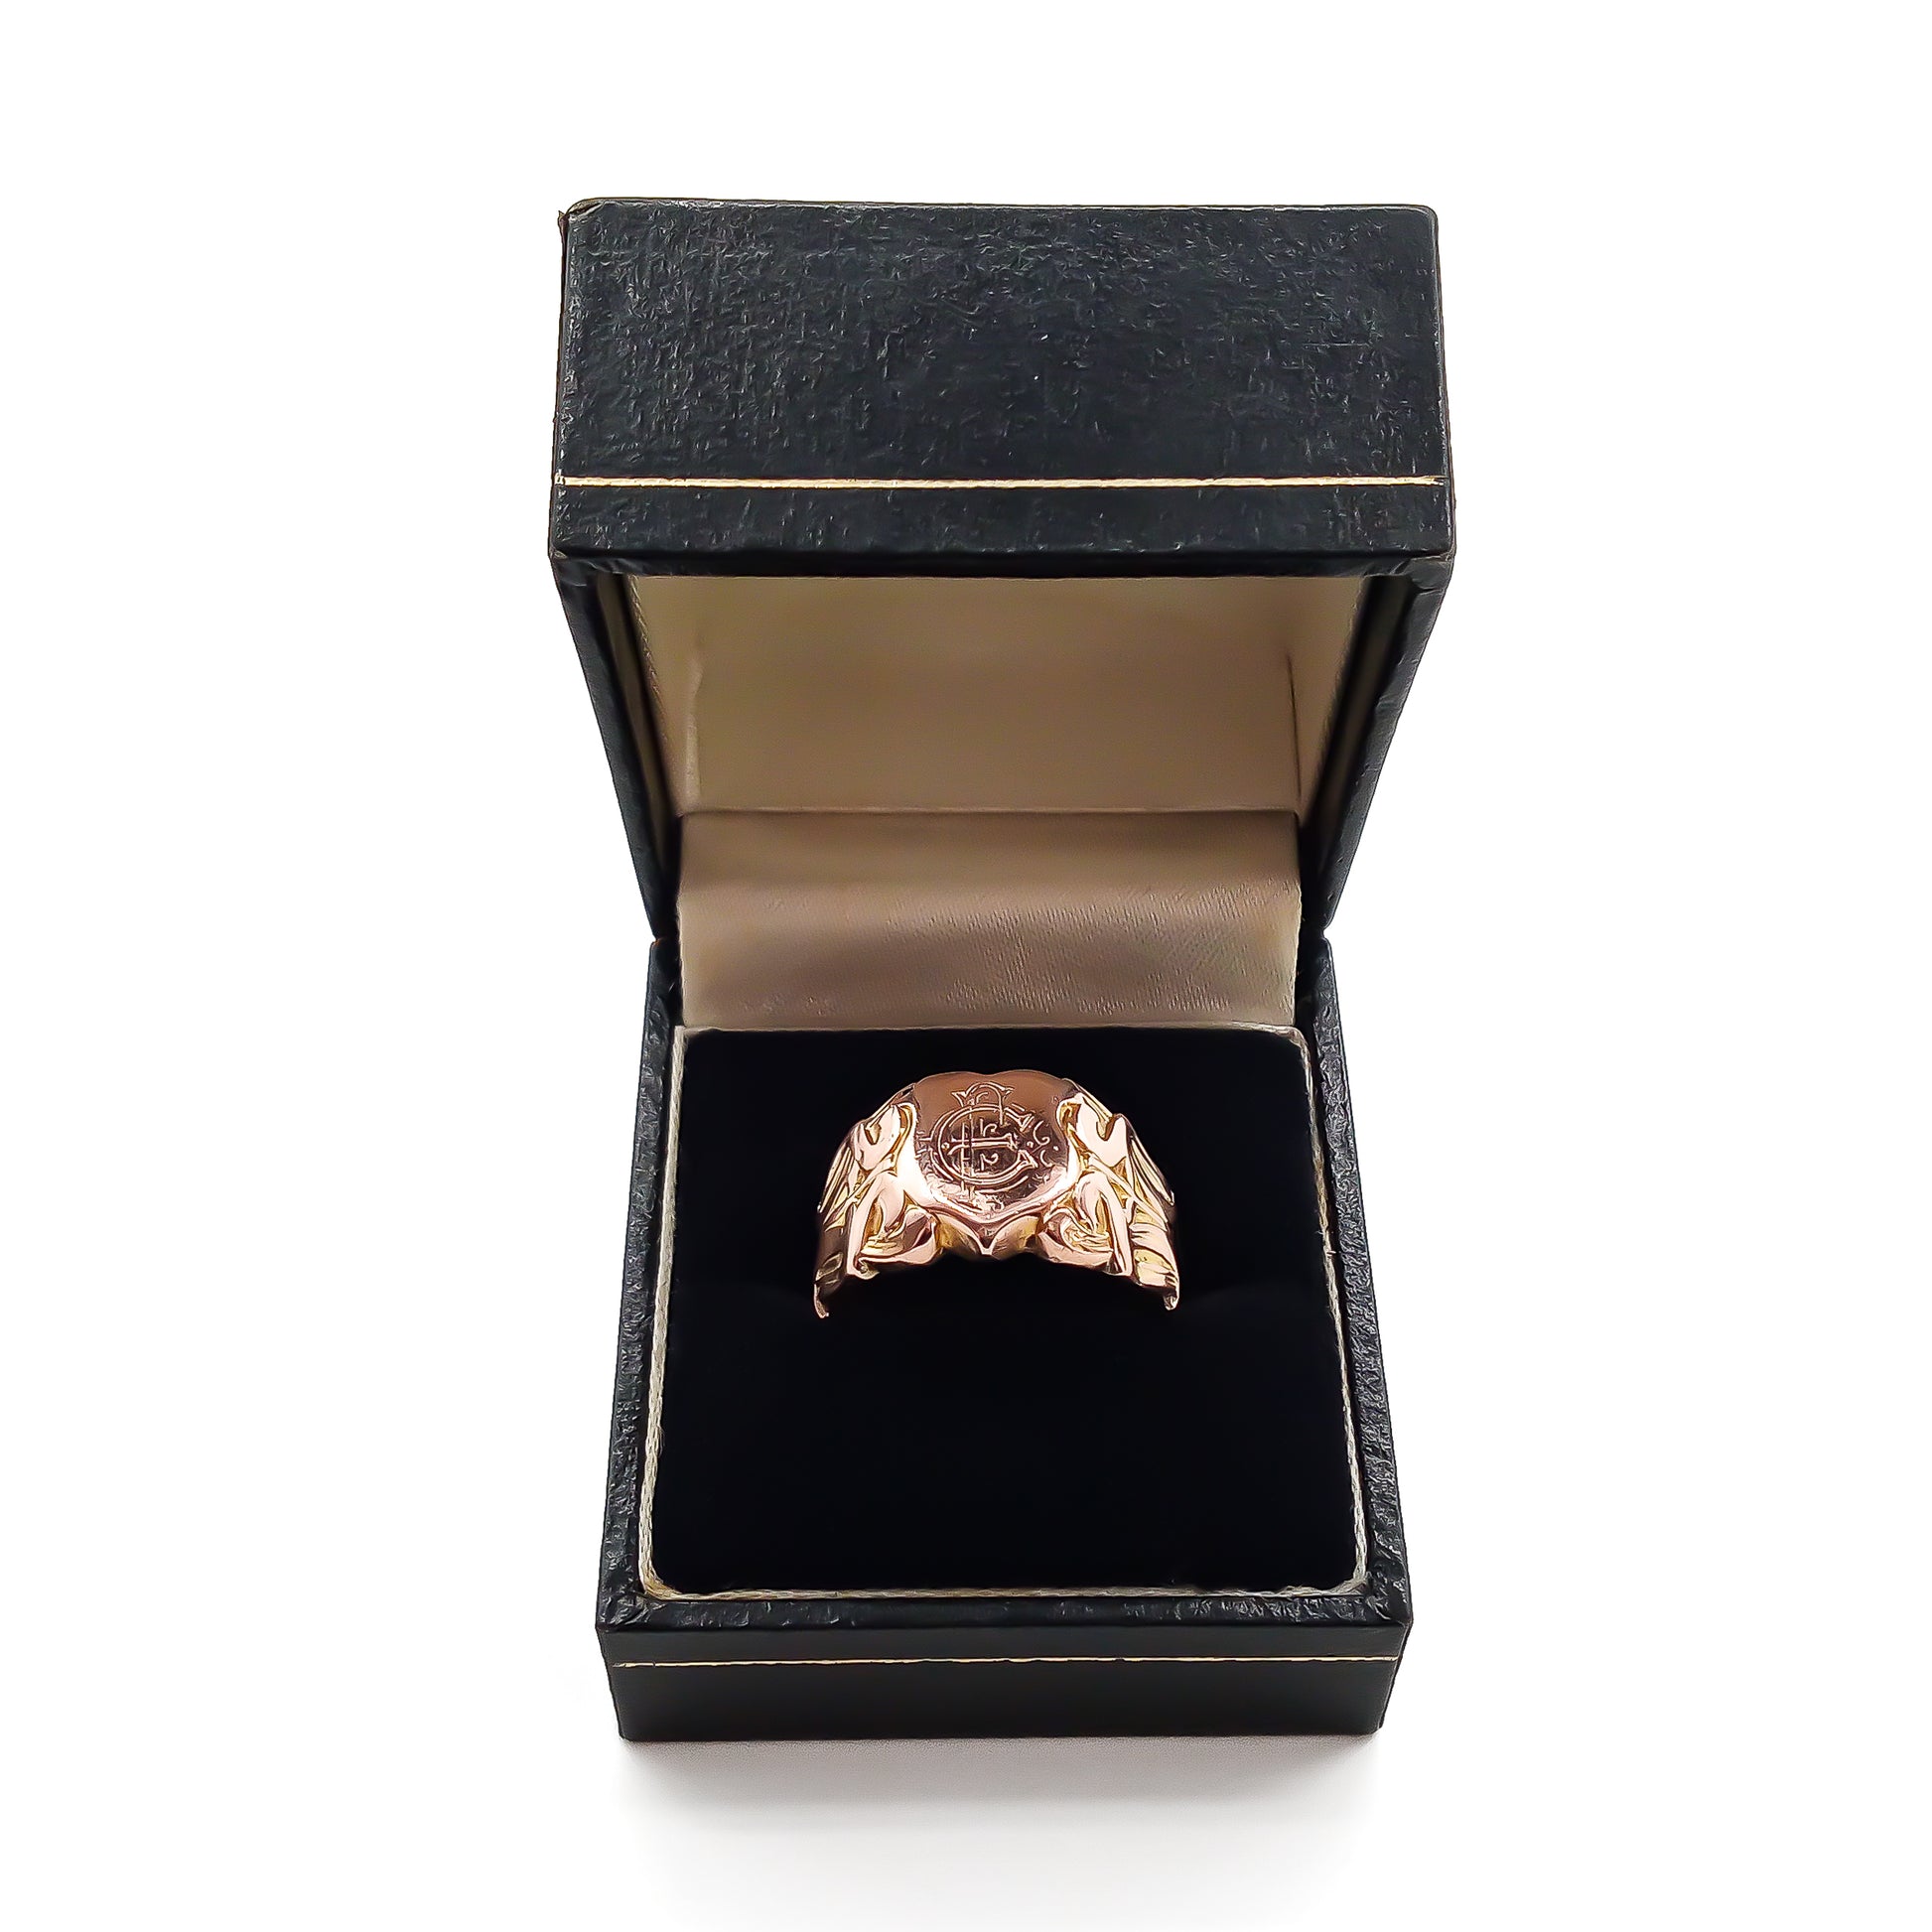 Magnificent 14ct rose gold signet ring with fancy script letters on a crest and beautiful art nouveau detail on the shank. 